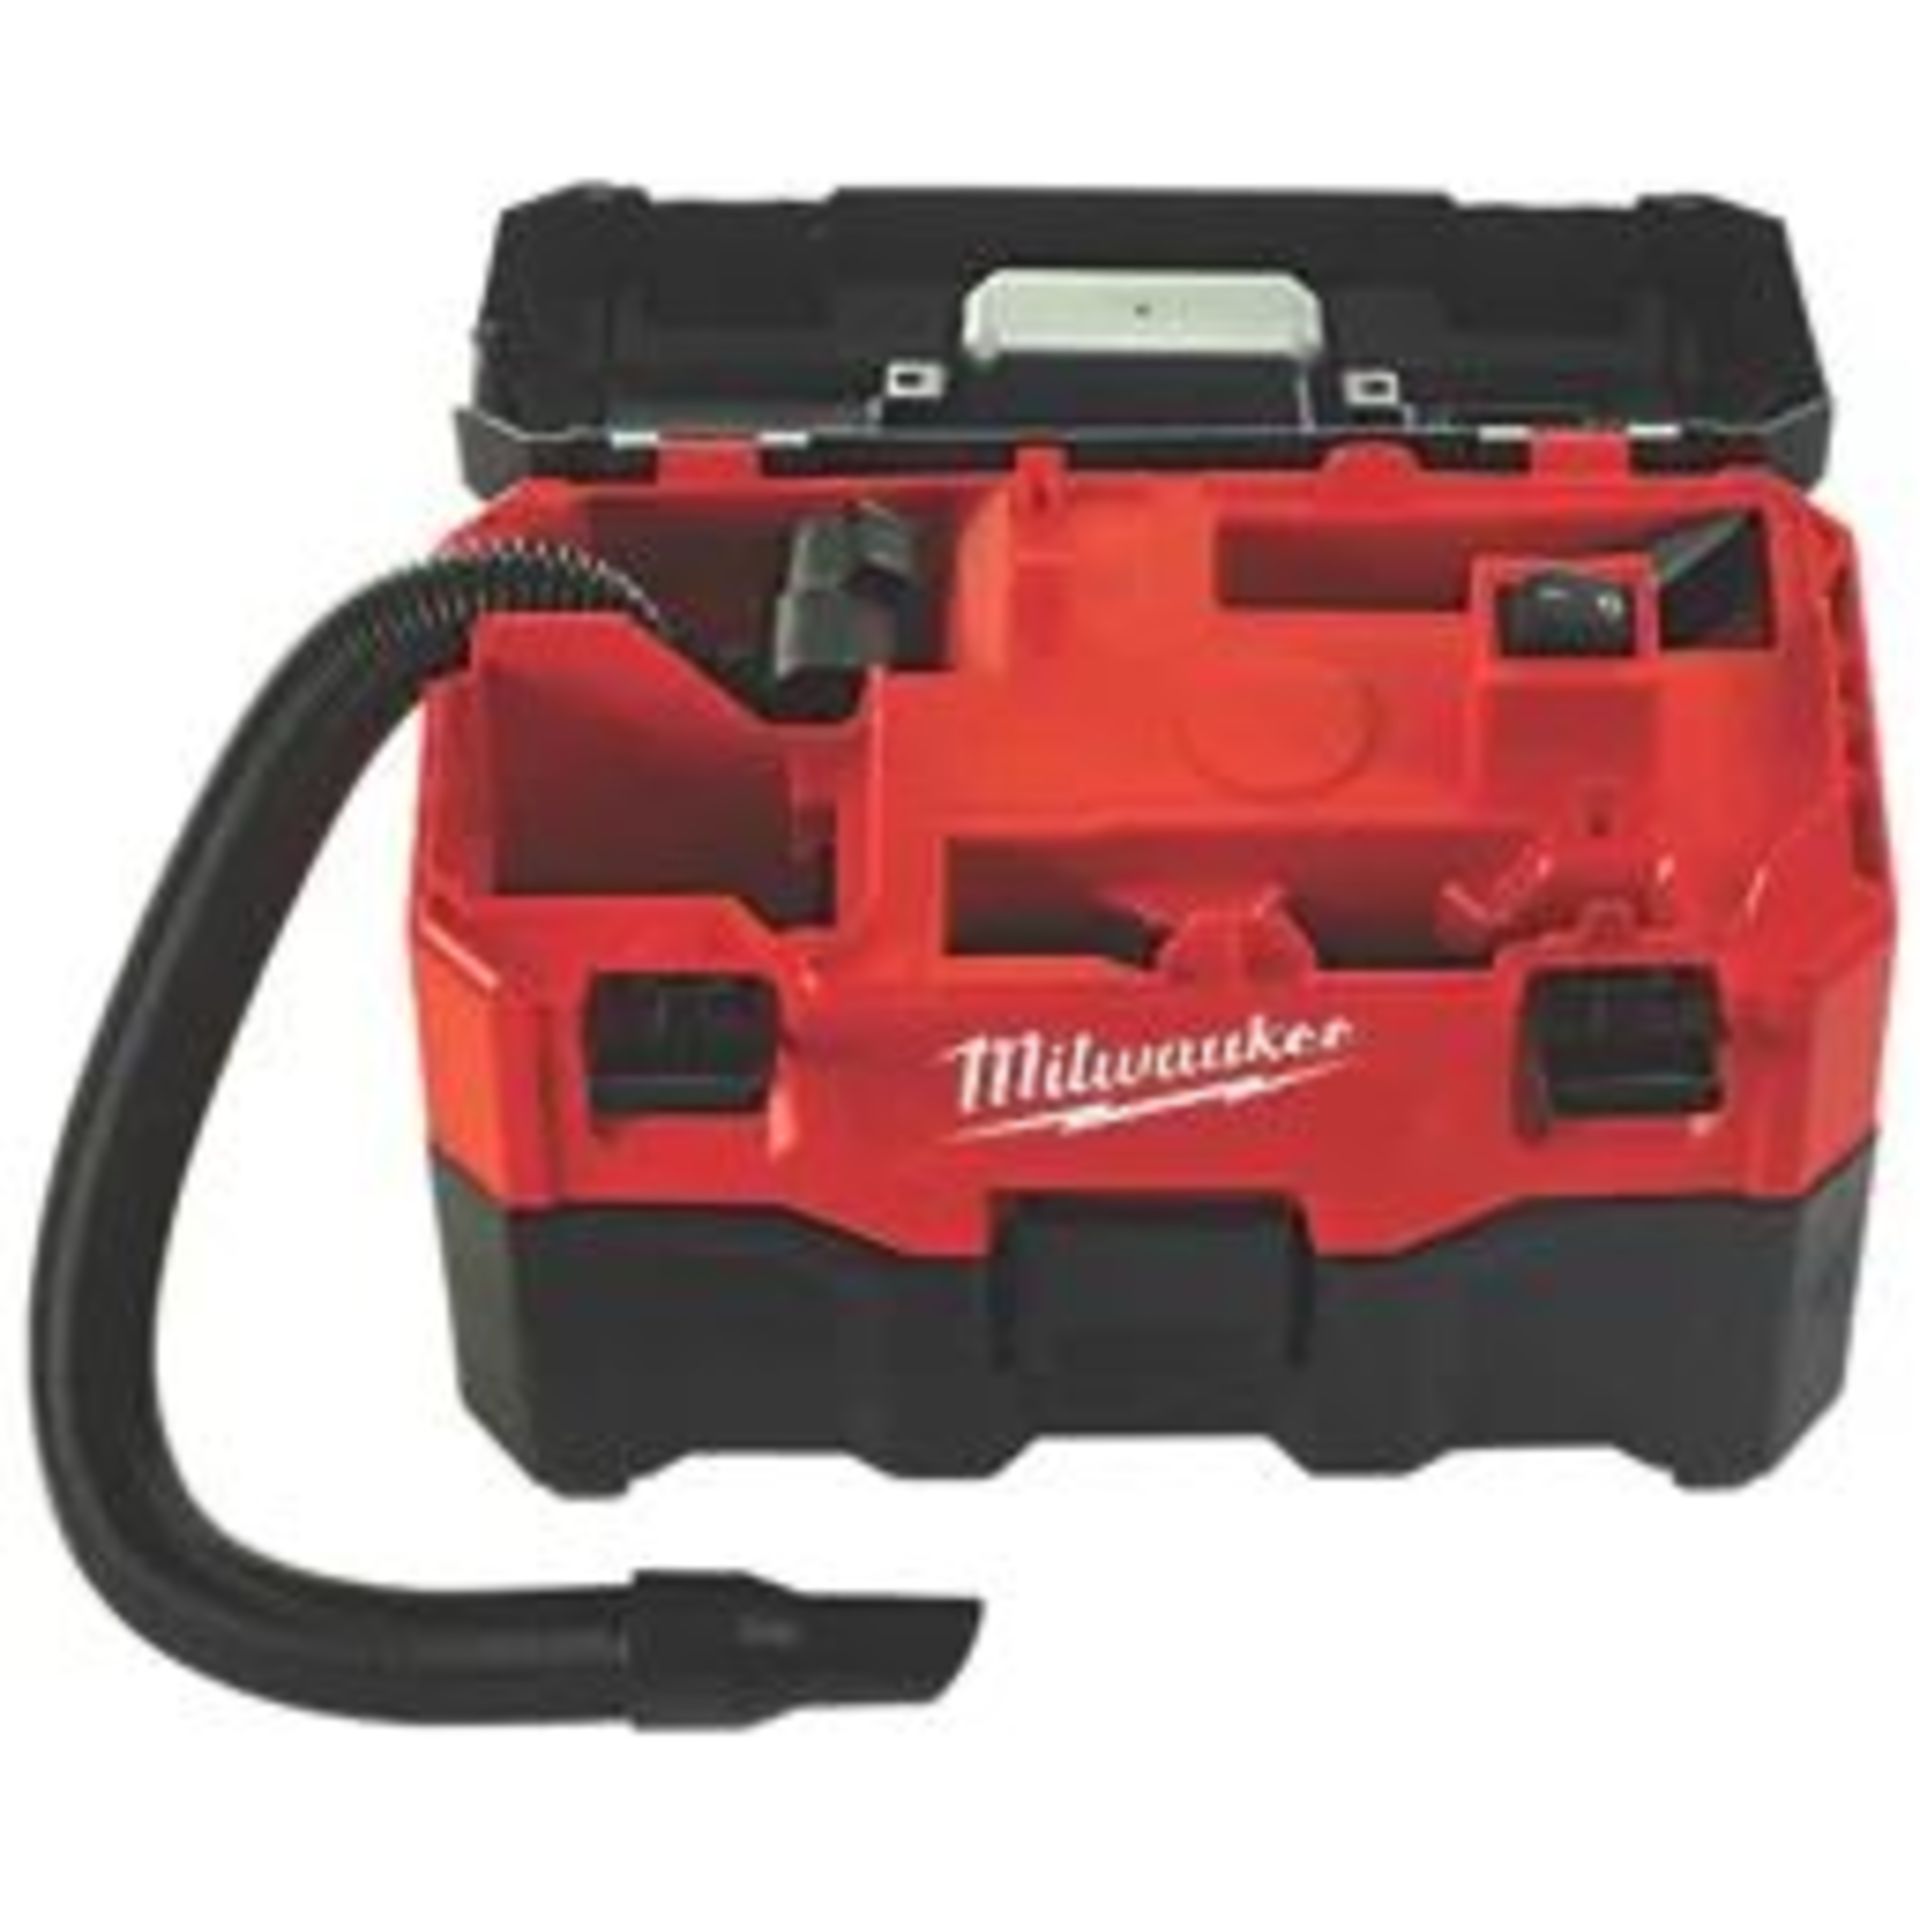 MILWAUKEE M18 VC2-0 18V LI-ION CORDLESS WET / DRY VACUUM - BARE. - P4. Features HEPA filter to